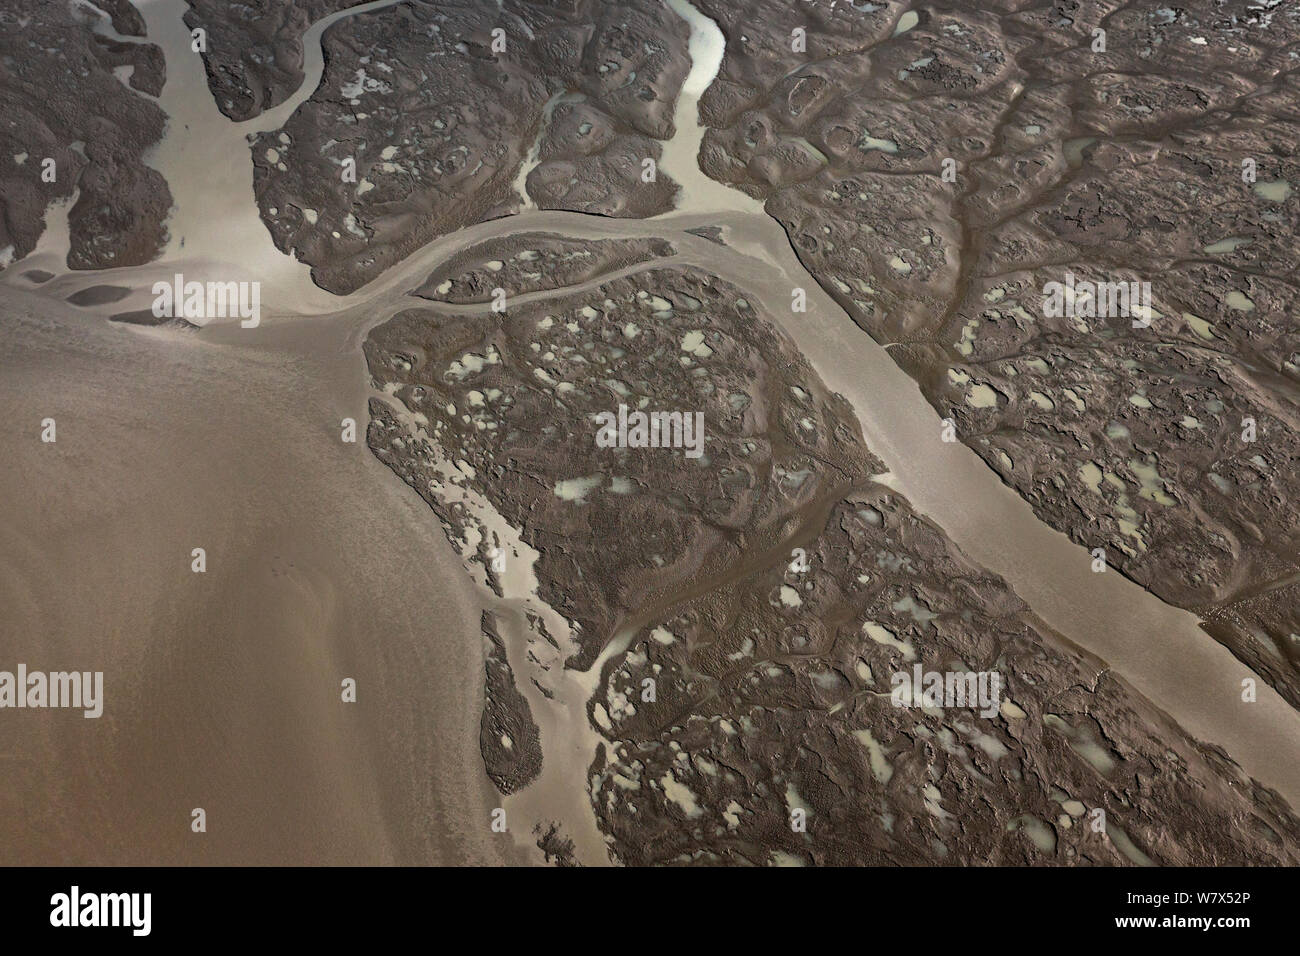 Tidal flats at low tide (aerial photo), Pacific Coast, Cook Inlet, Alaska, USA. June 2013. Stock Photo